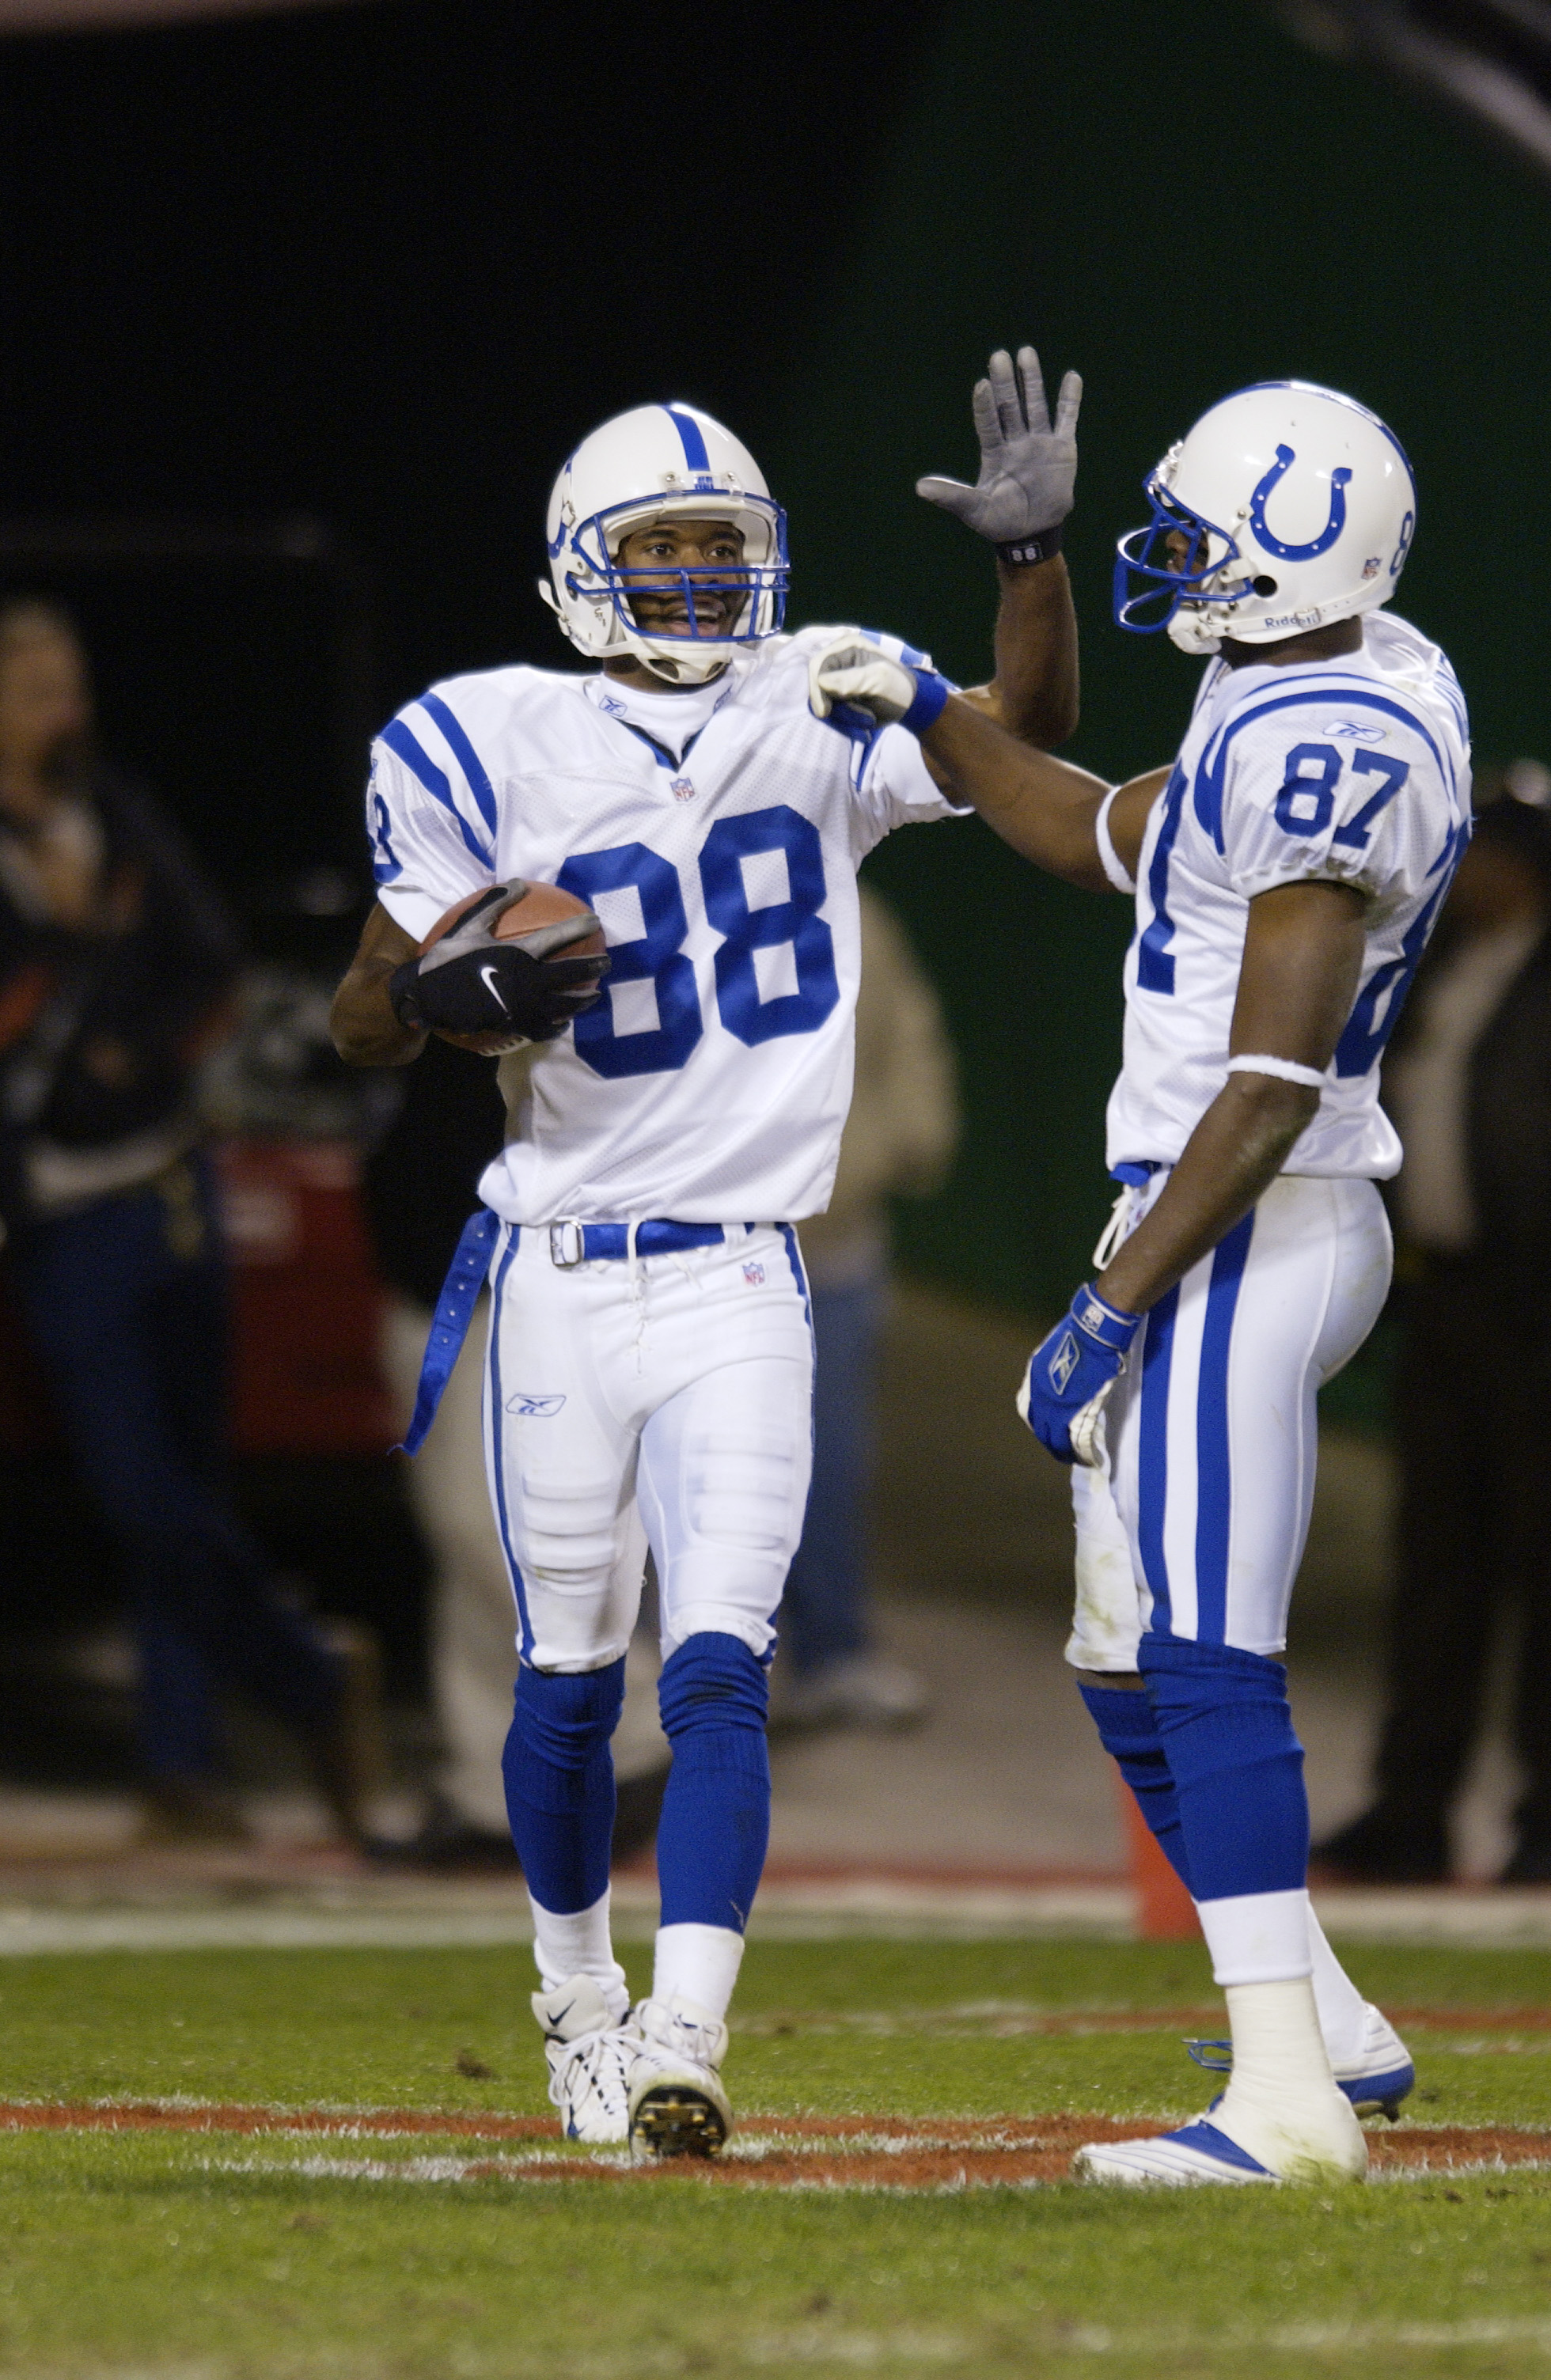 25 Oct 2001 : Marvin Harrison #88 of the Indianapolis Colts is congratulated by Reggie Wayne #87 after scoring a touchdown against the Kansas City Chiefs during the game at Arrowhead Stadium in Kansas City, Missouri. The Colts won 35-28. DIGITAL IMAGE. Ma